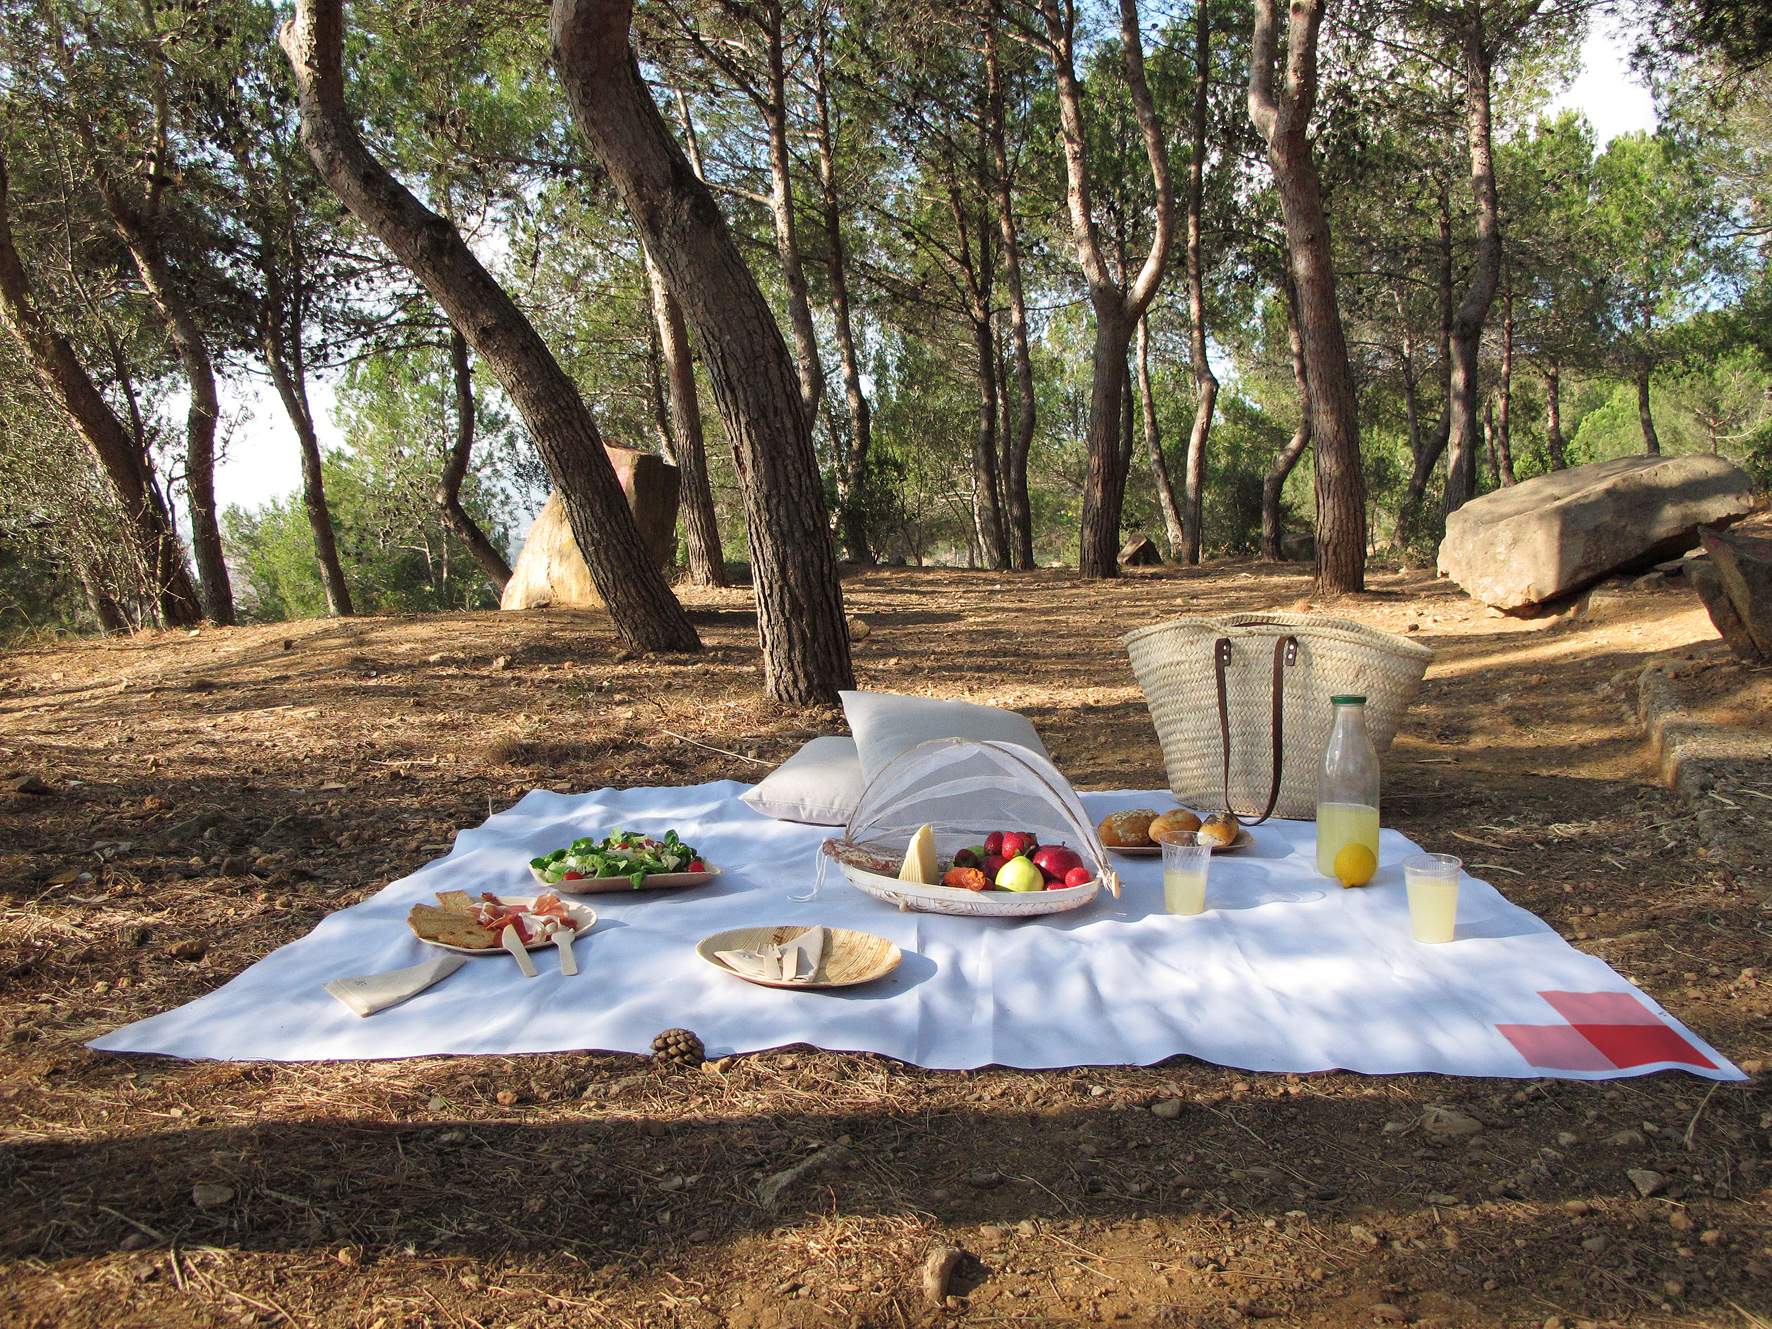 Picnic Barcelona | We deliver amazing picnics in the best spots!